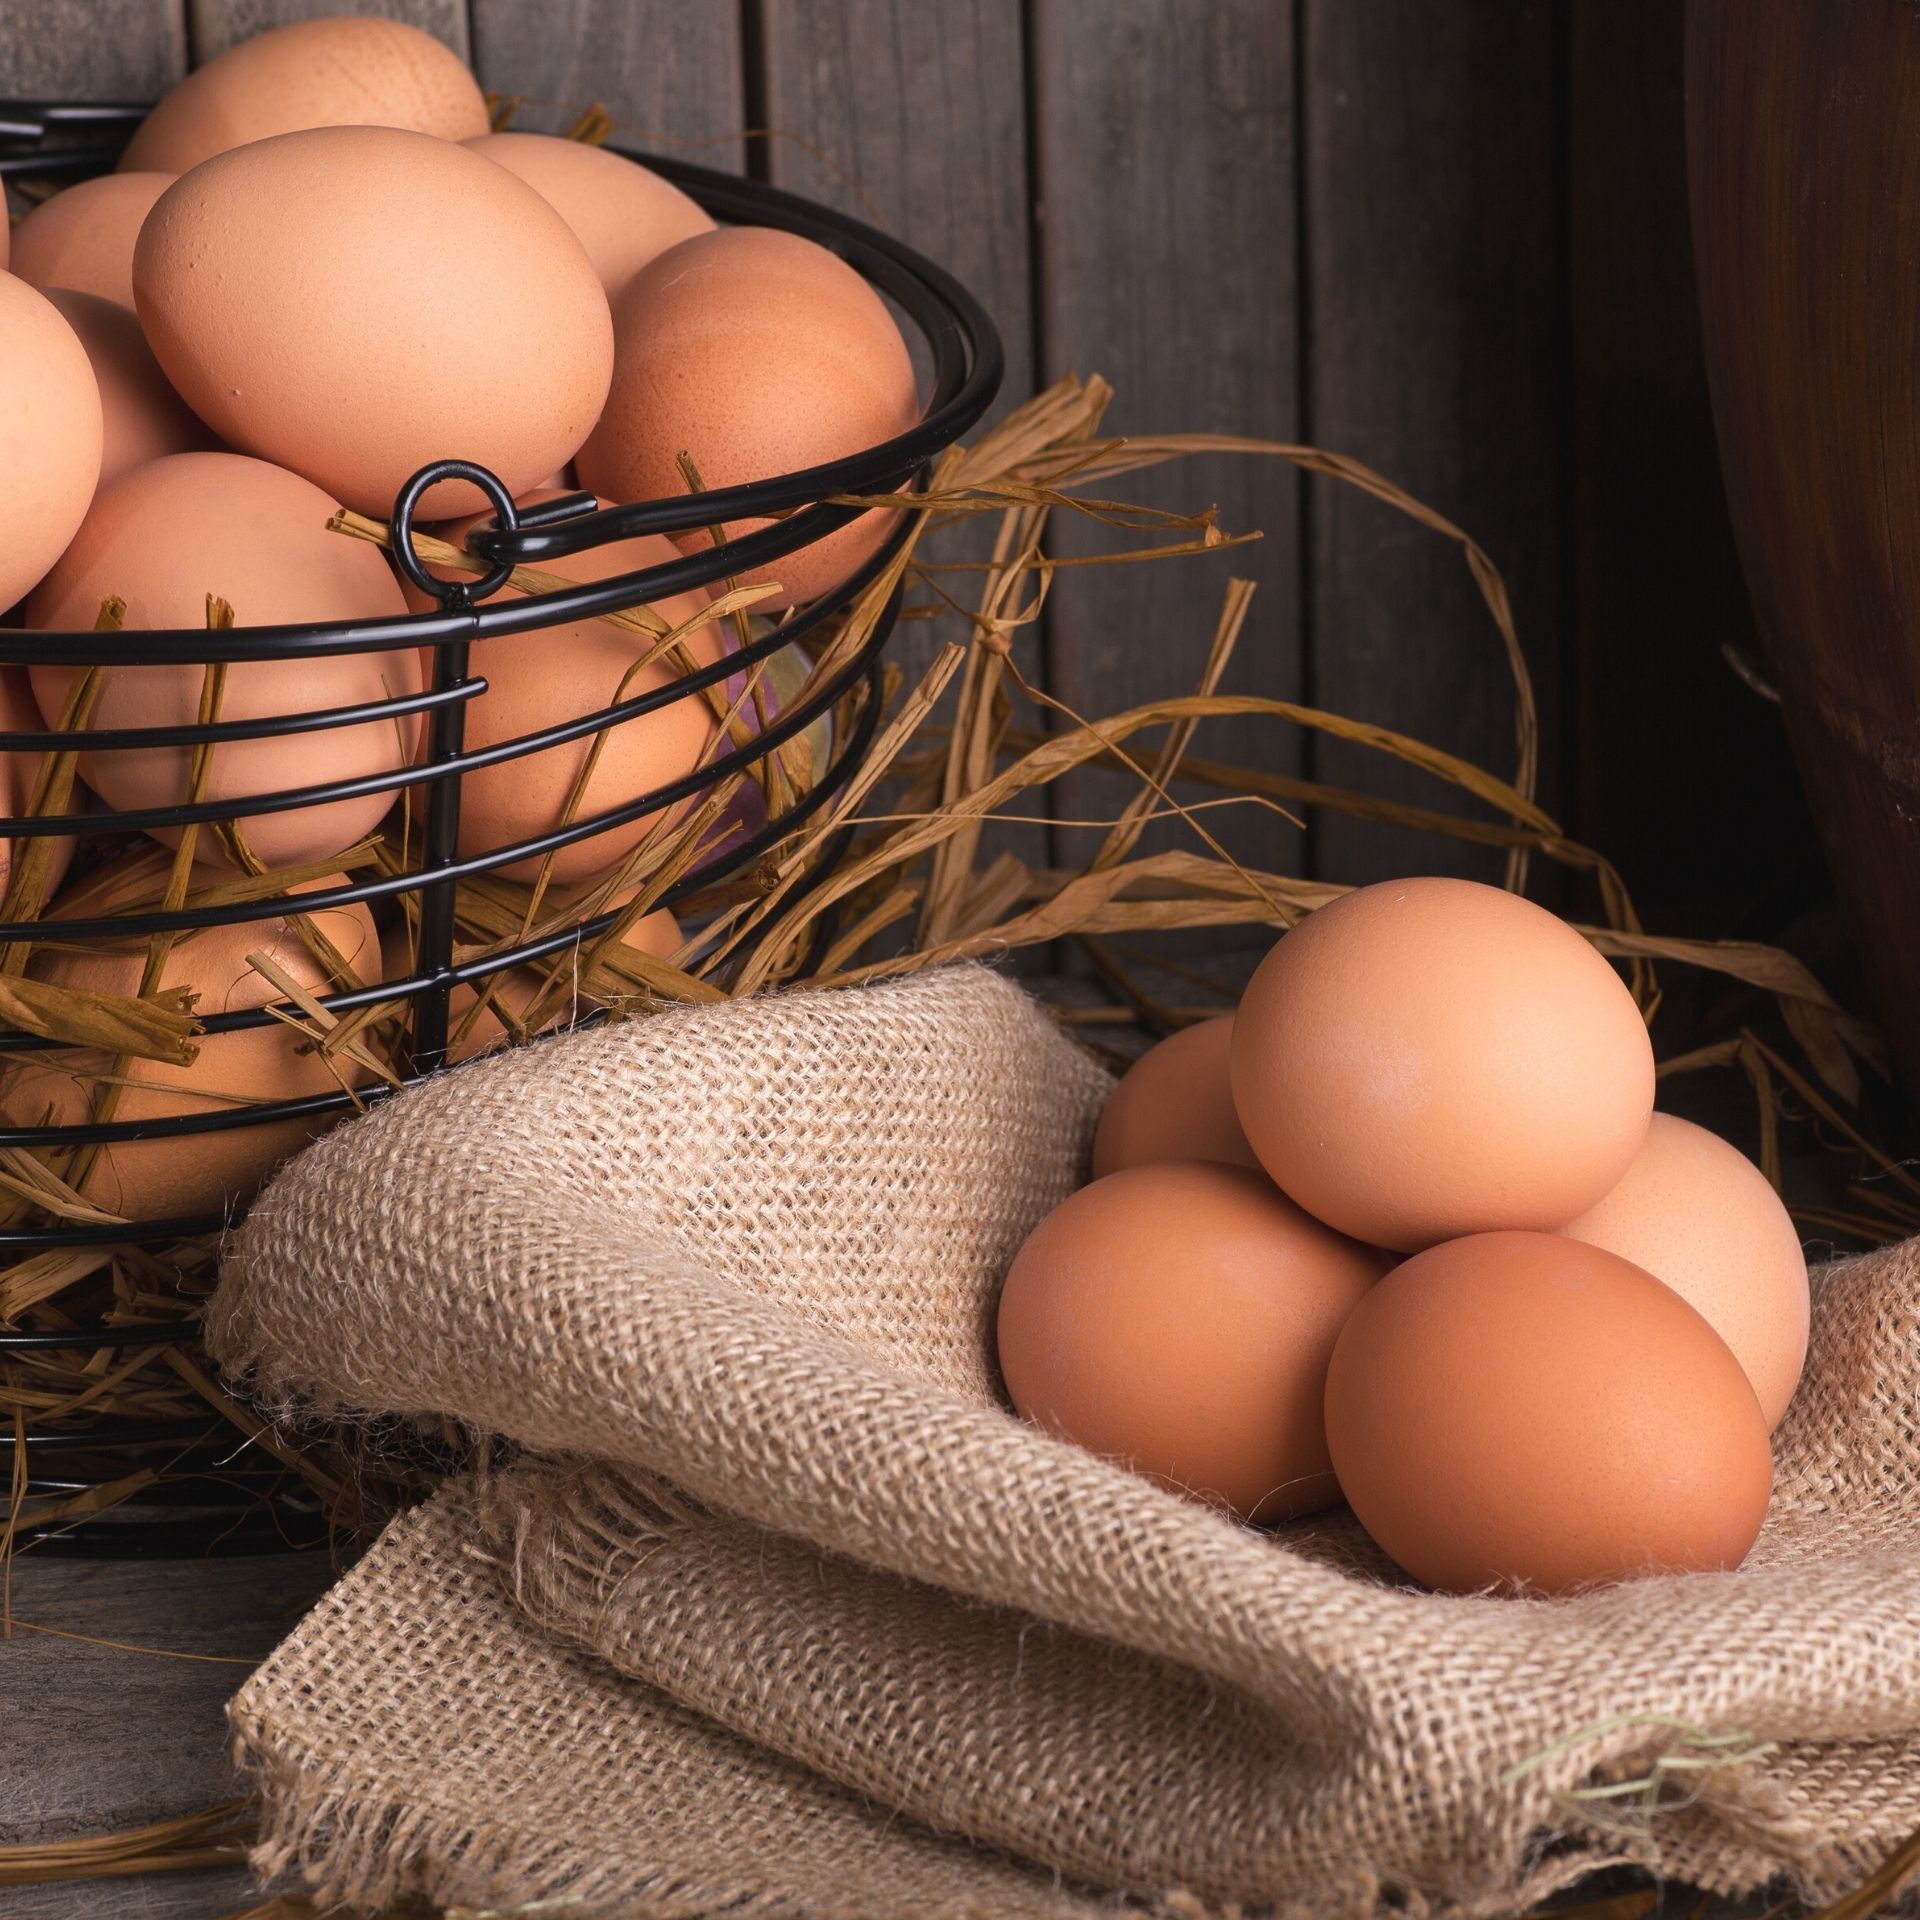 eggs from a ground-based poultry farm